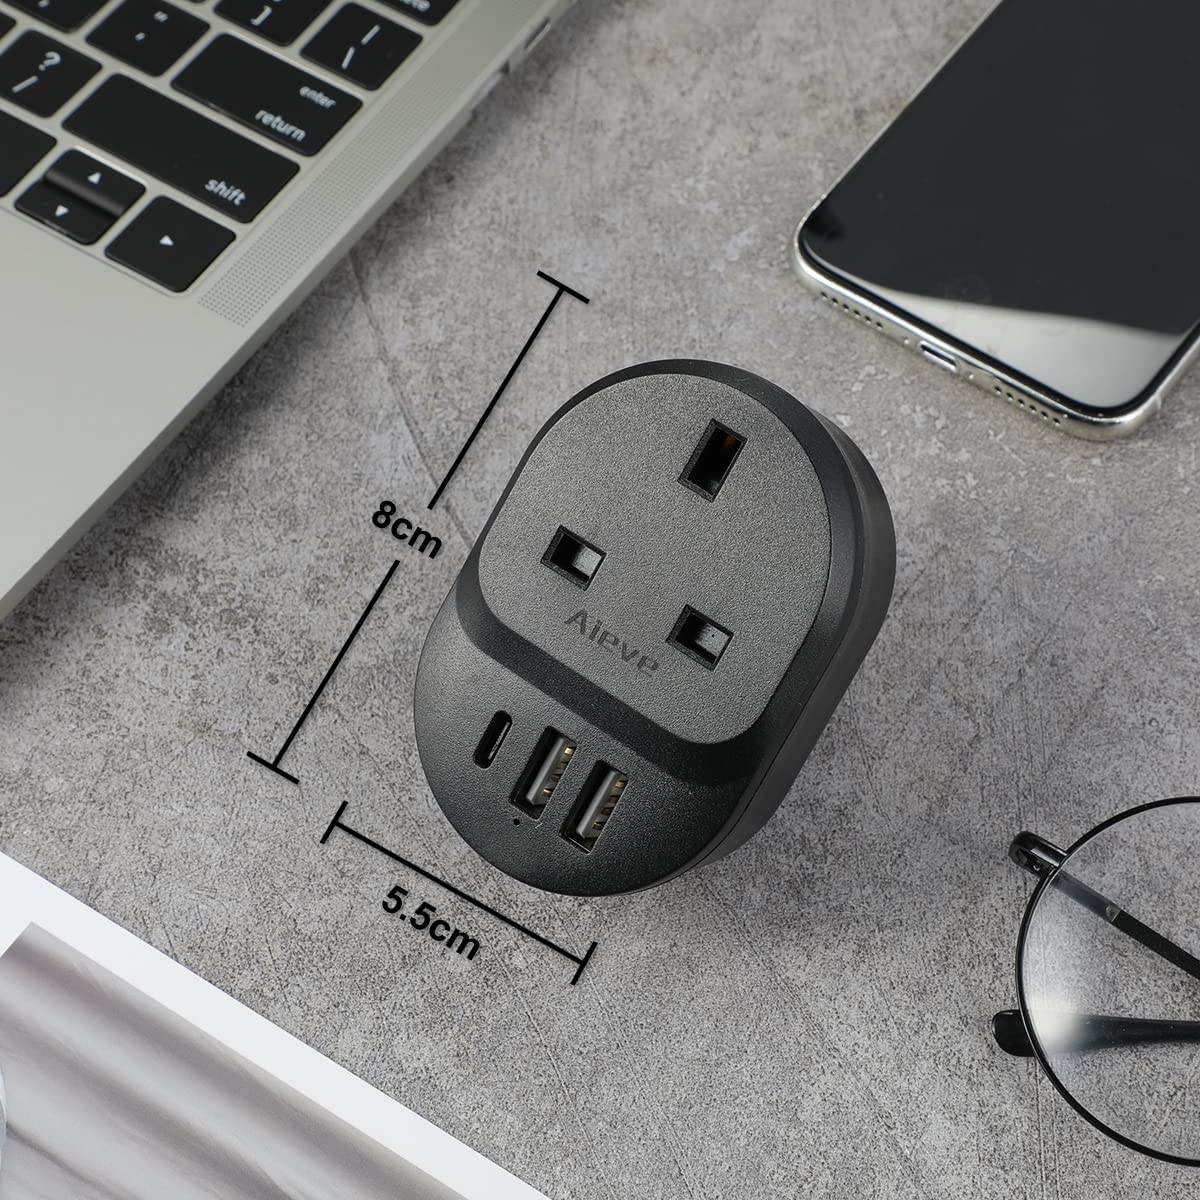 UK to EU Plug Adapter, AIEVE UK to European Plug Adapter with 2 USB and QC 3.1A Type C Port,Euro Europe Travel Adaptor for Germany France Iceland Poland Spain Russia and More (Type E/F)